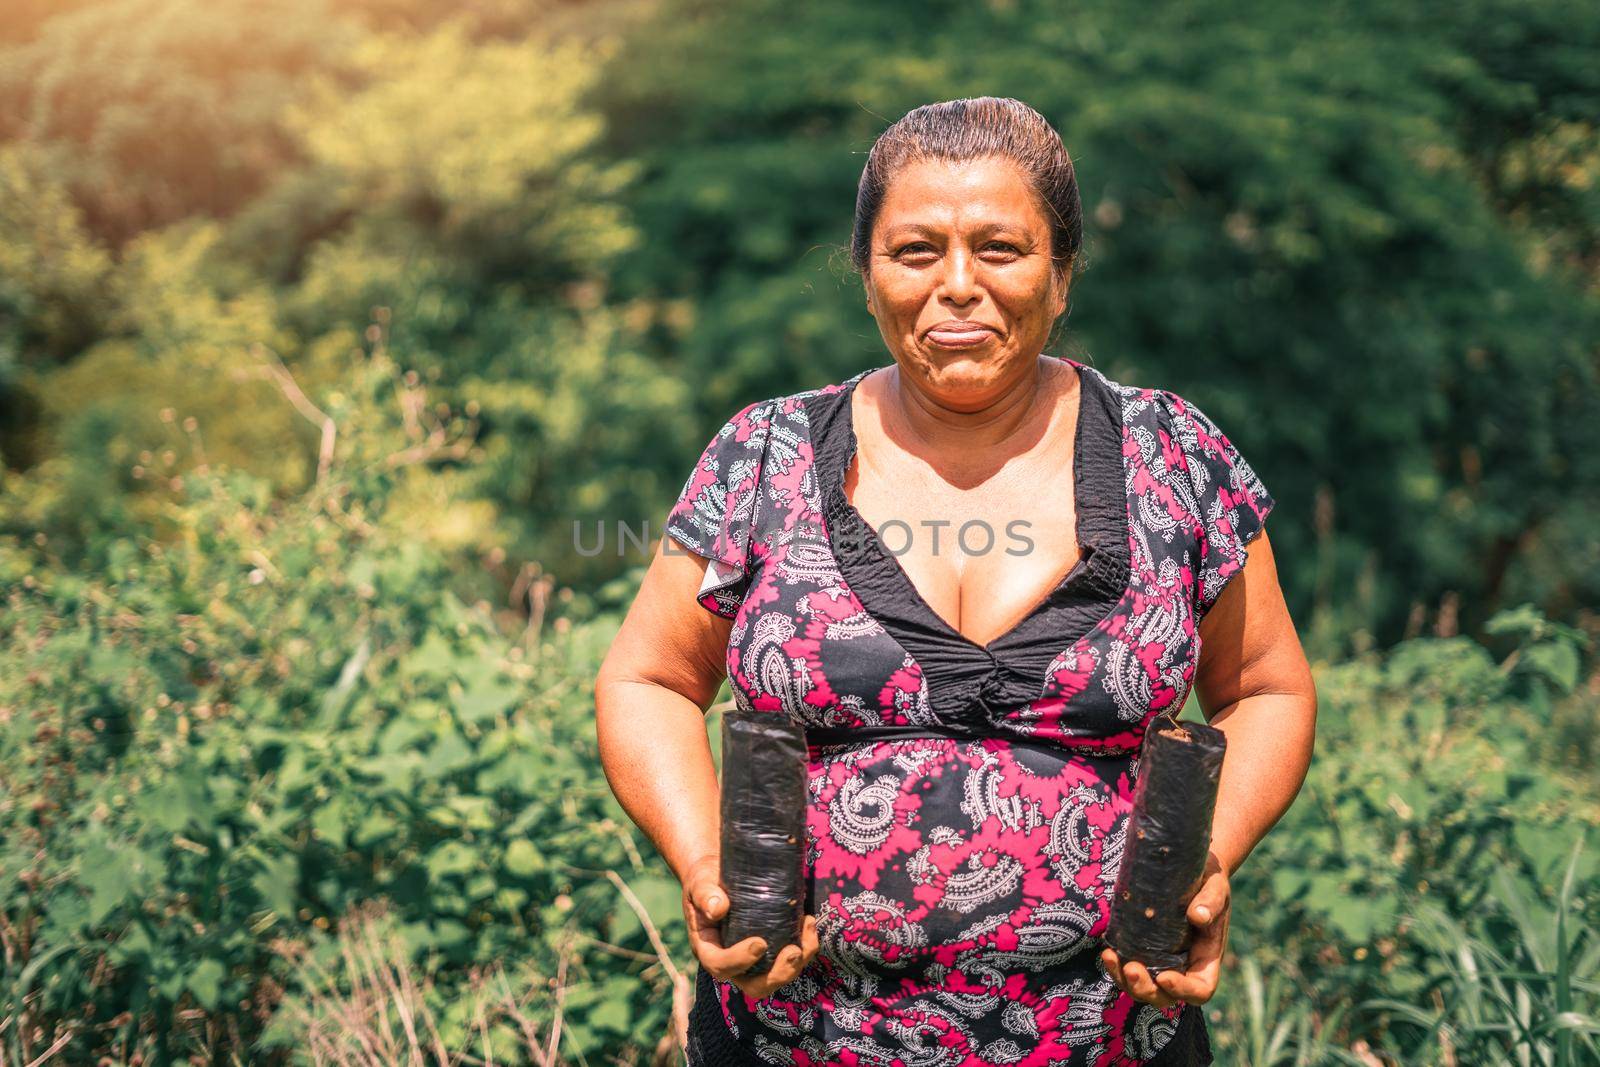 Portrait of a Nicaraguan peasant woman holding bags of plants in rural Masaya Nicaragua. Photo with copy space. by cfalvarez